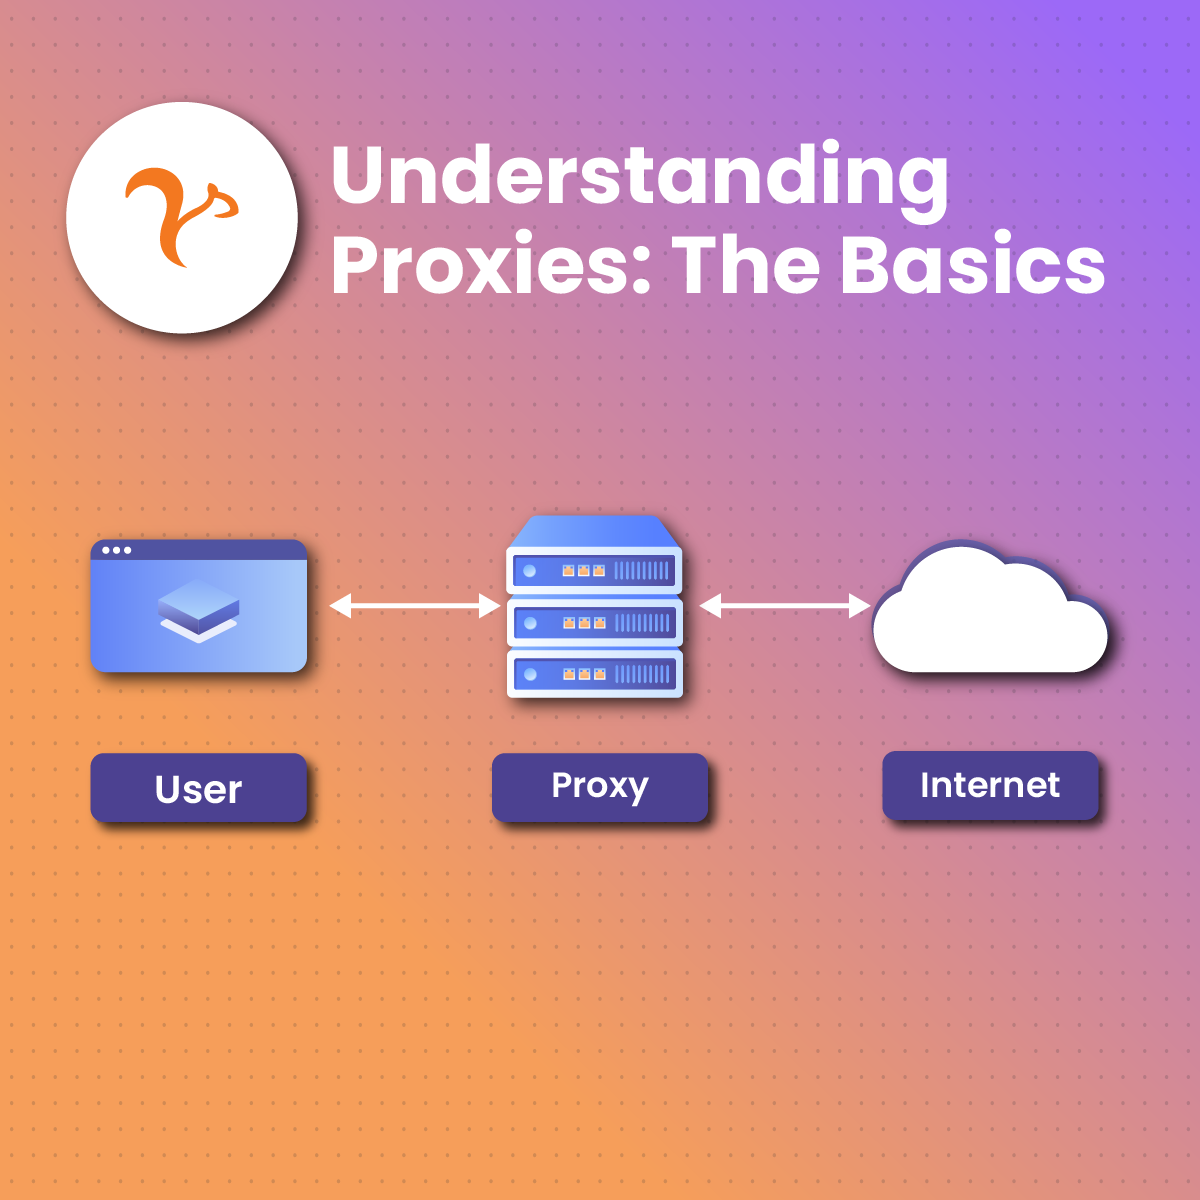 What Are Proxy Settings? Meaning, Definition, Uses, and More!